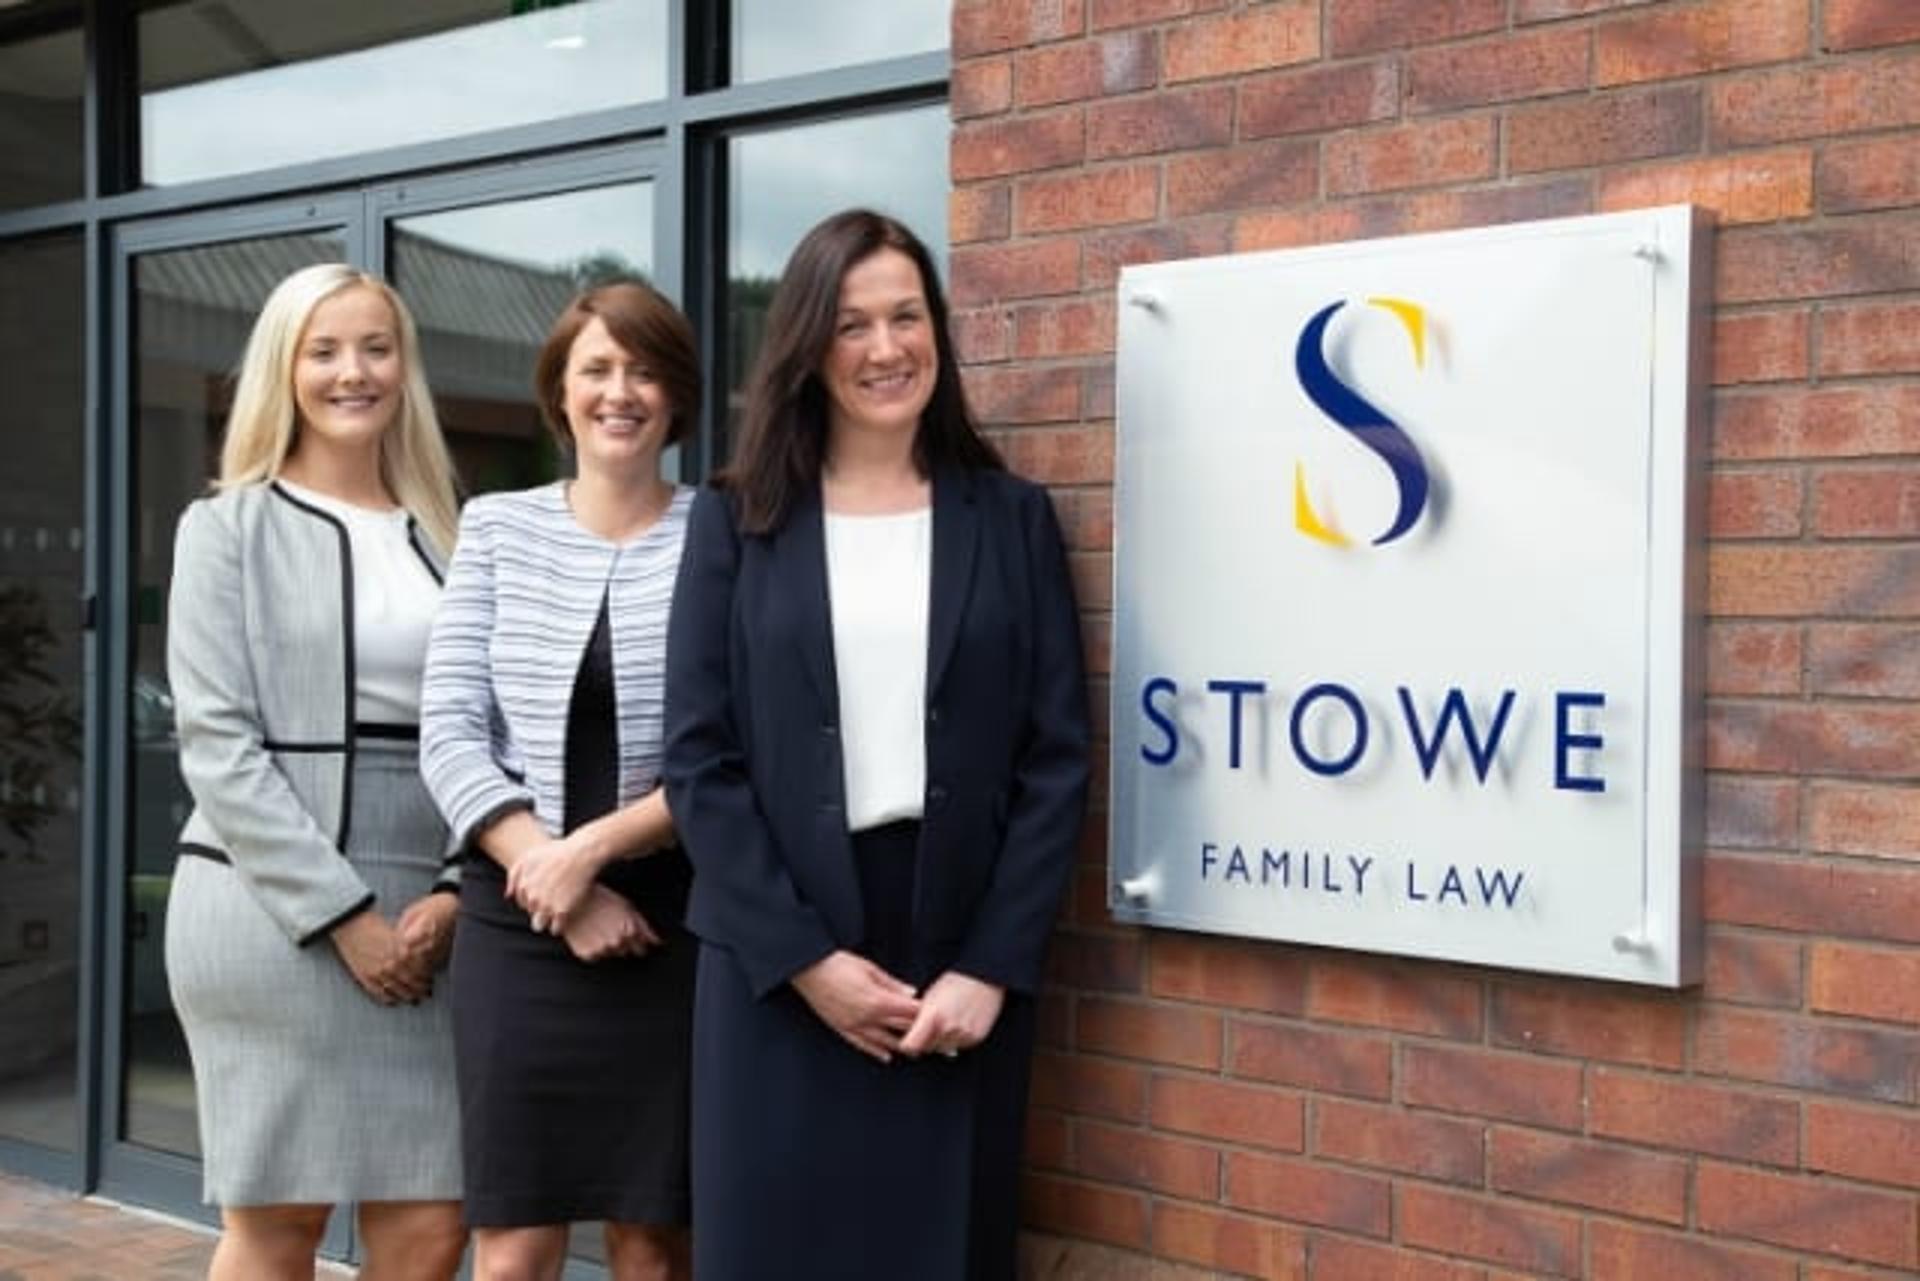 PE-backed law firm adds locations across the UK with acquisition